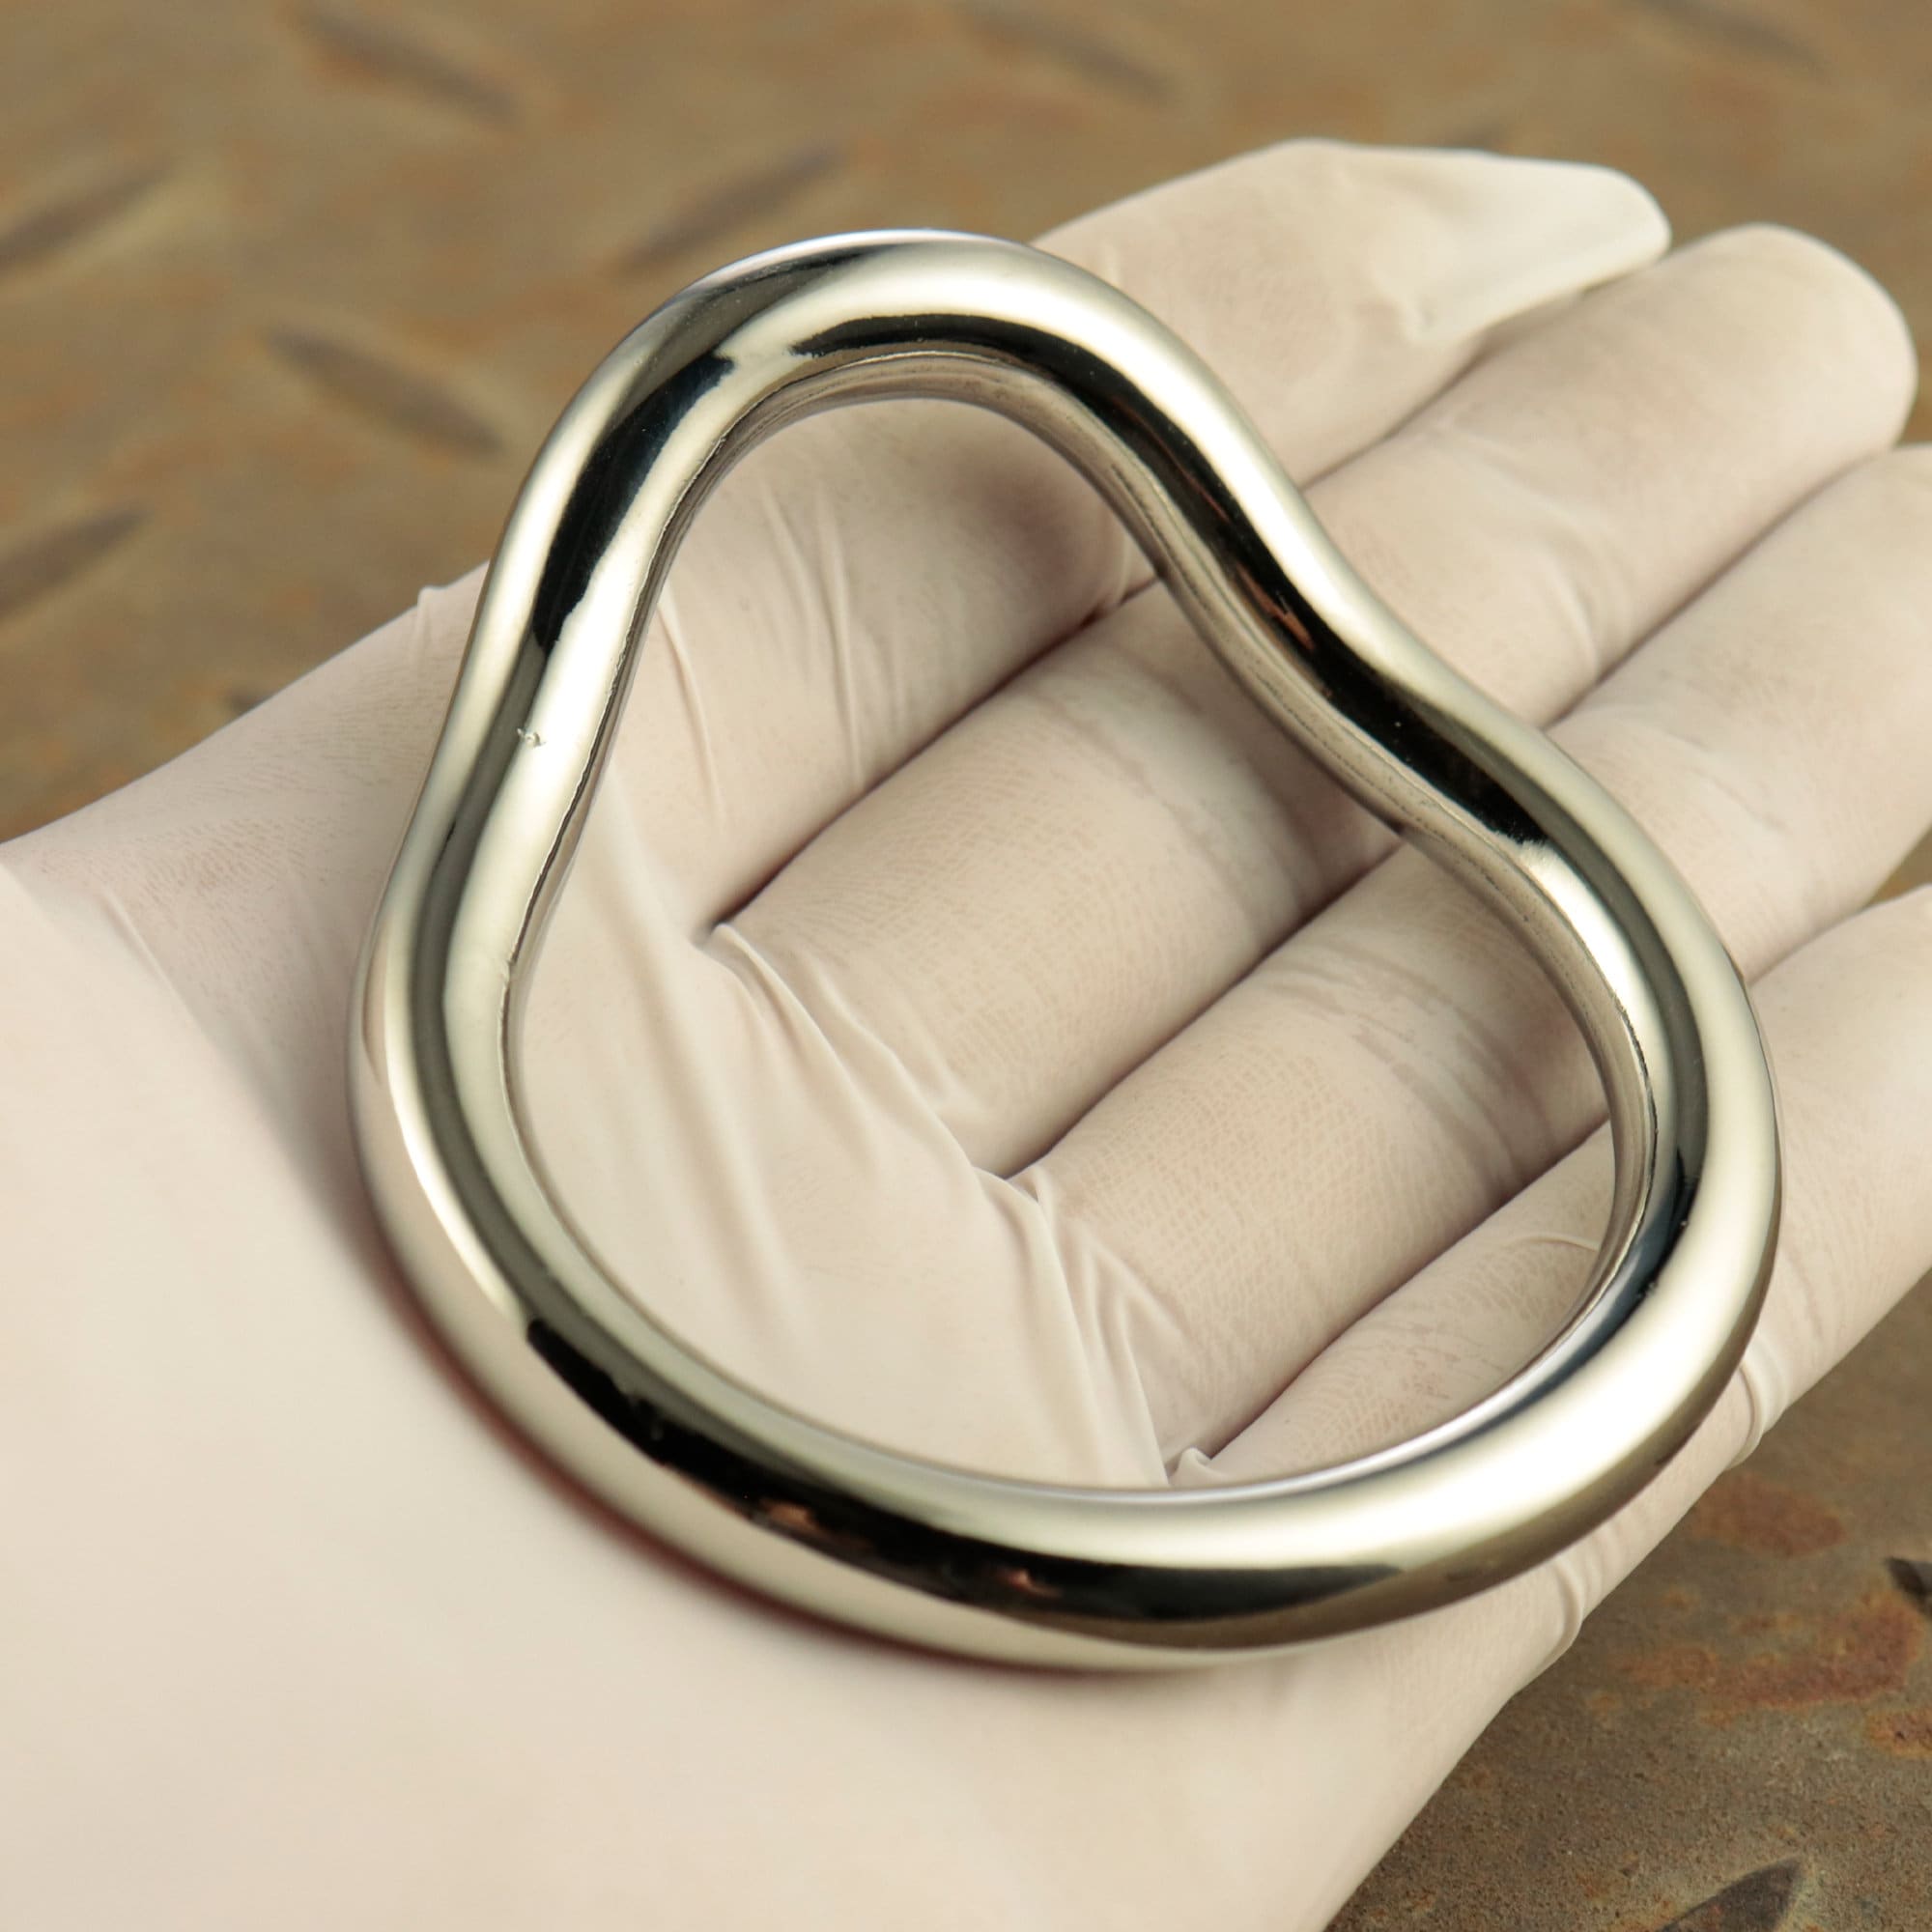 Stainless Steel Metal Cock Ring Metal Penis Ring,Made of Curved Stainless  Steel Arc Ringand Polished Without Edges (L)